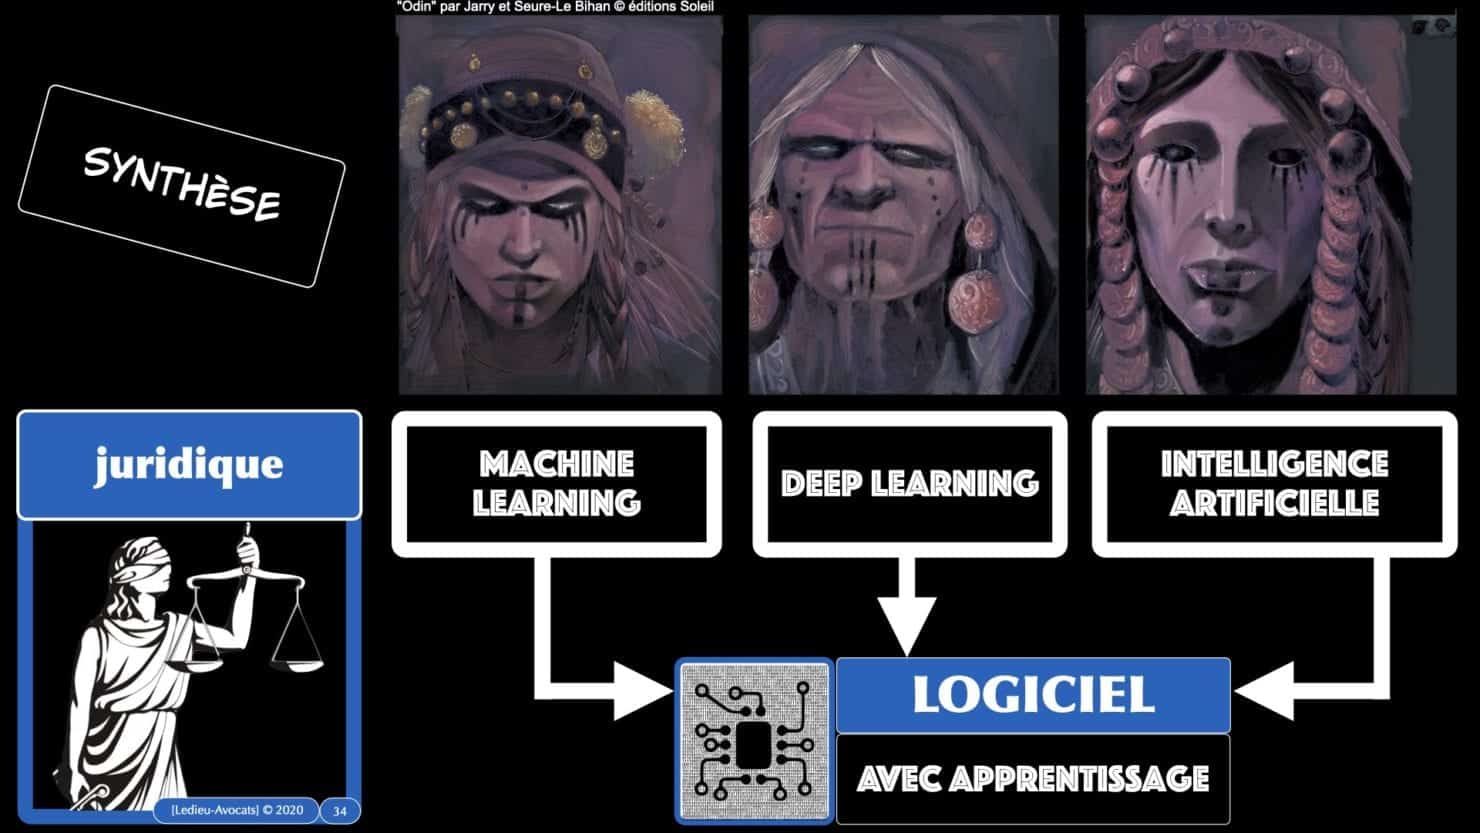 machine learning deep learning Intelligence artificielle SYNTHESE